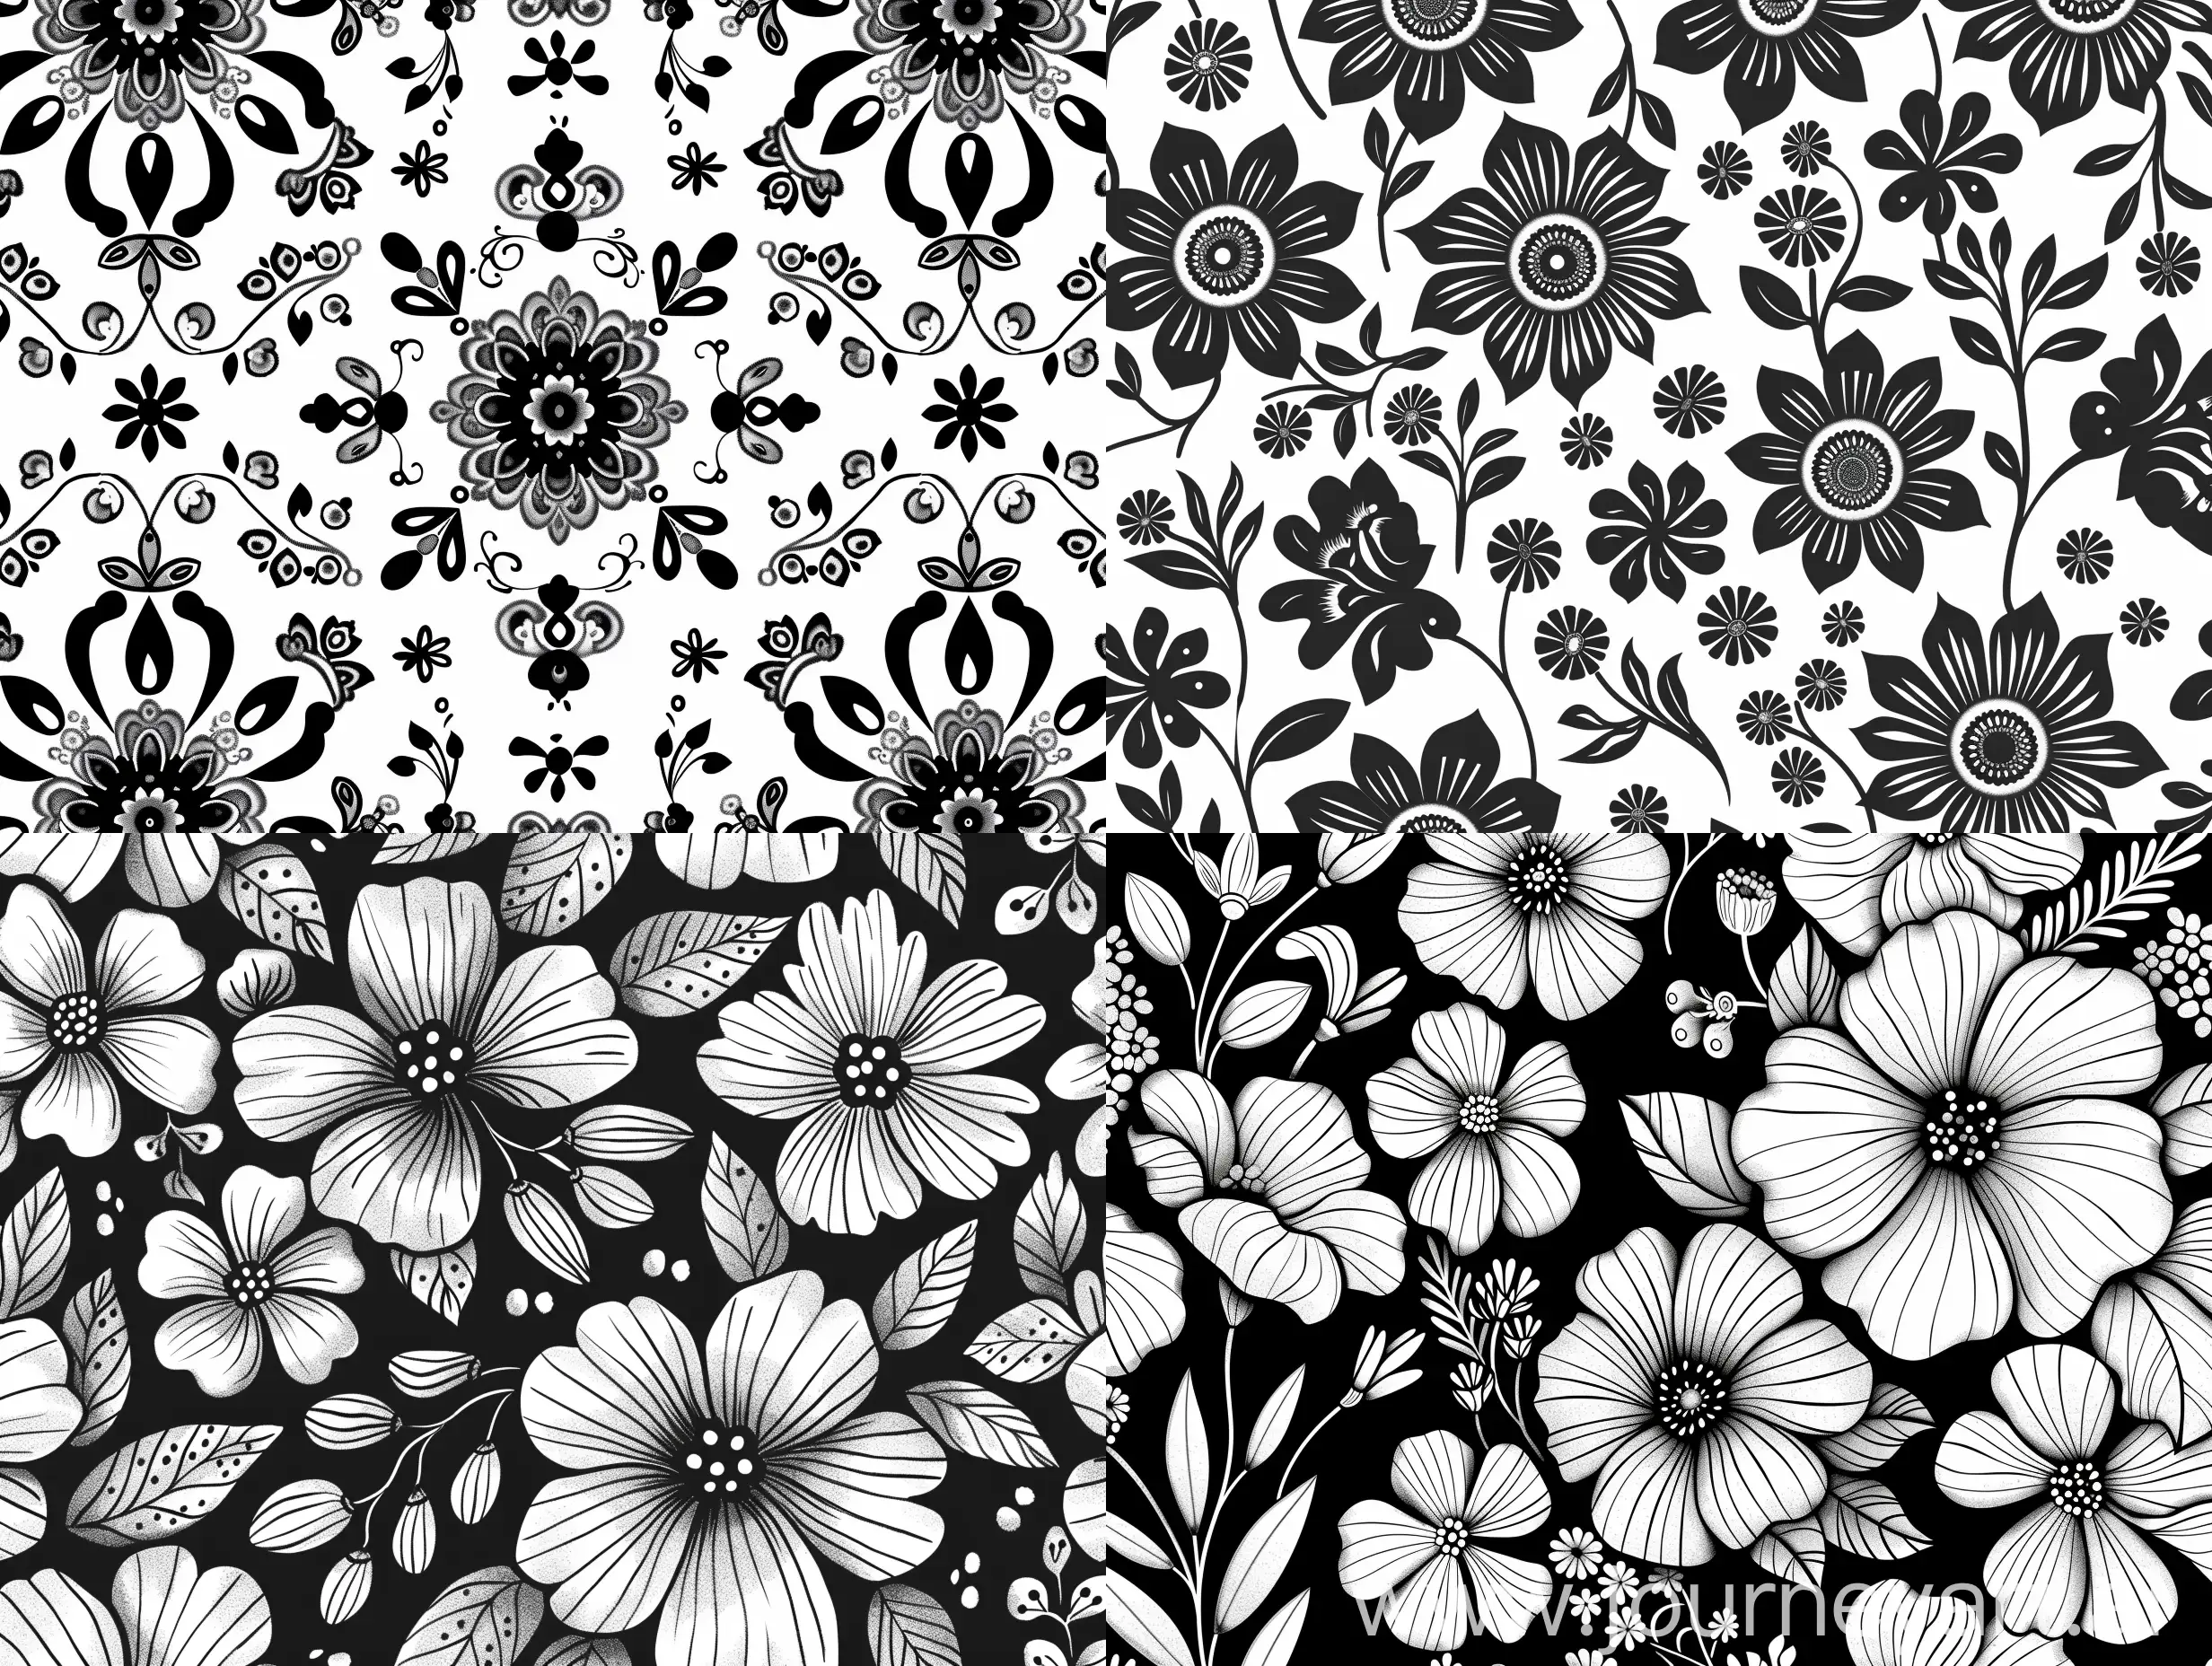 black and white pattern. in the form of flowers, not large elements.
